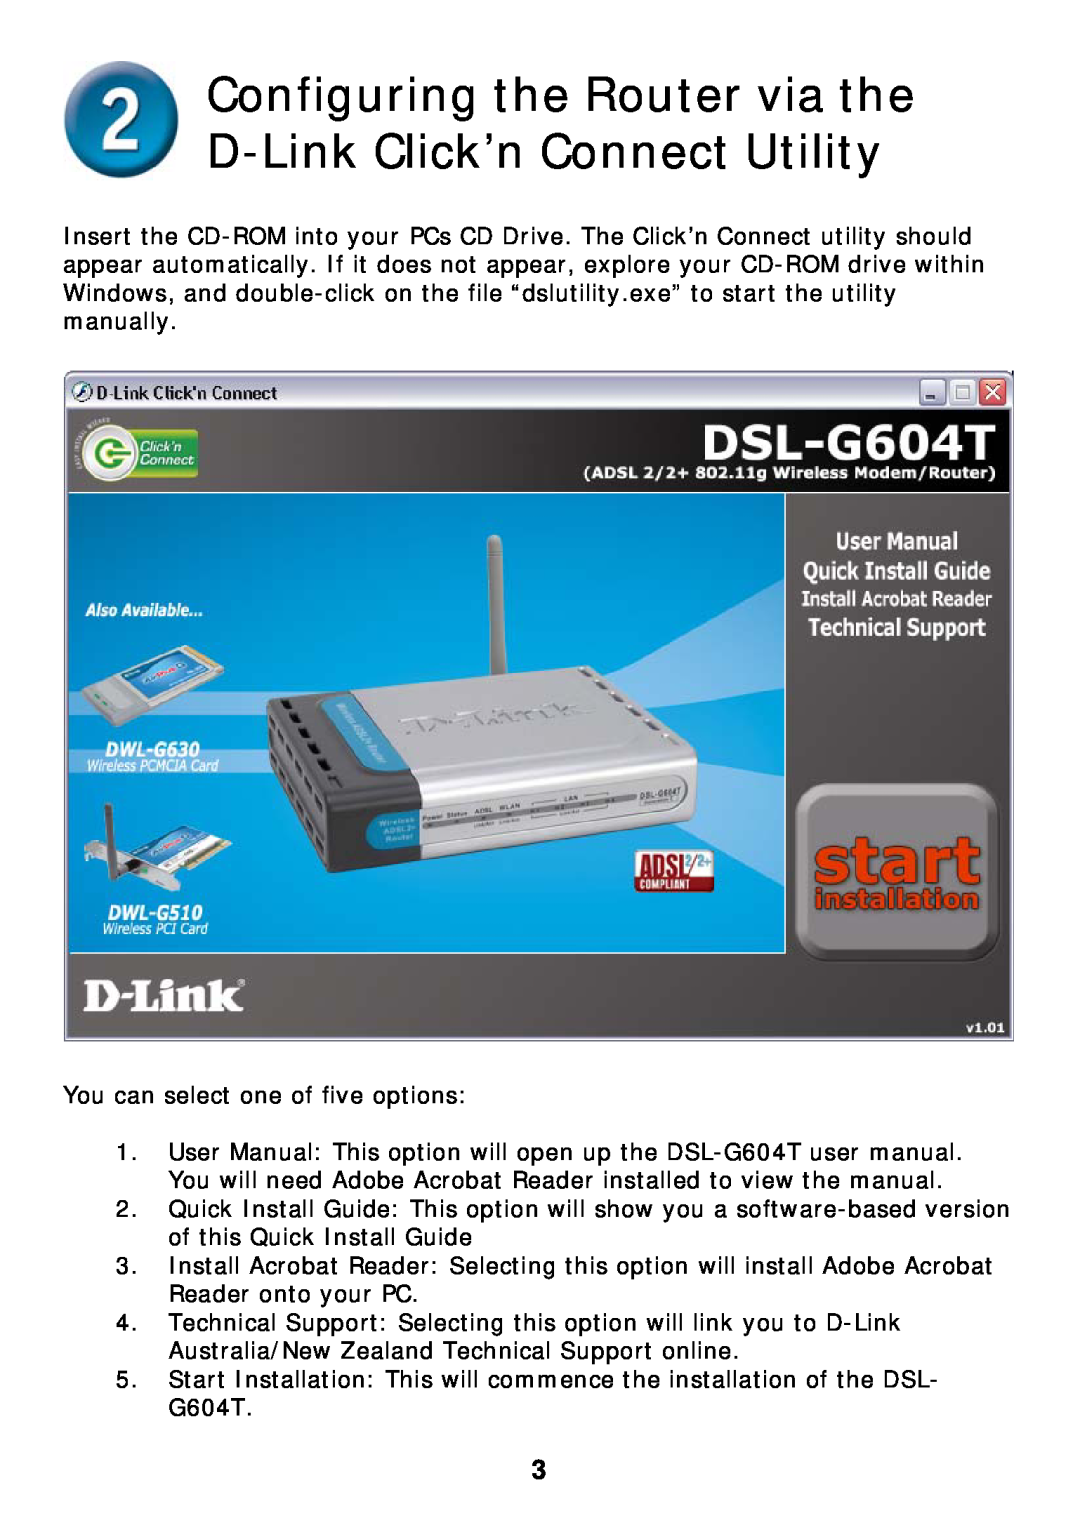 D-Link DSL-G604T specifications Configuring the Router via the D-Link Click’n Connect Utility 